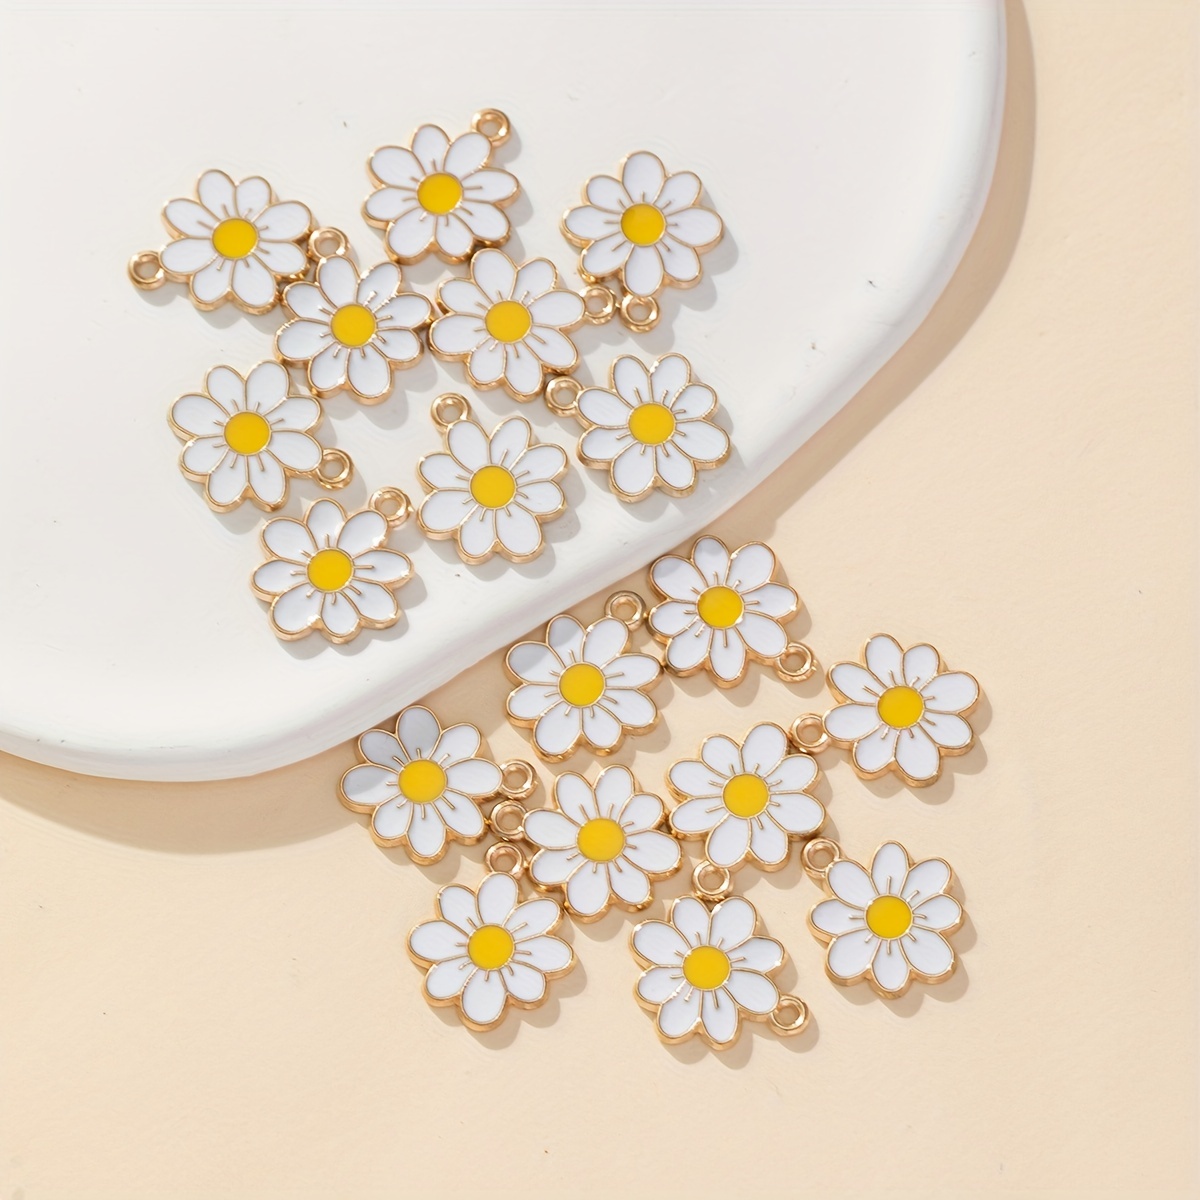 Vintage Style Flower Pendant, Daisy Charm, Spring Beads, Daisy Flower  Charms for Jewelry Making 